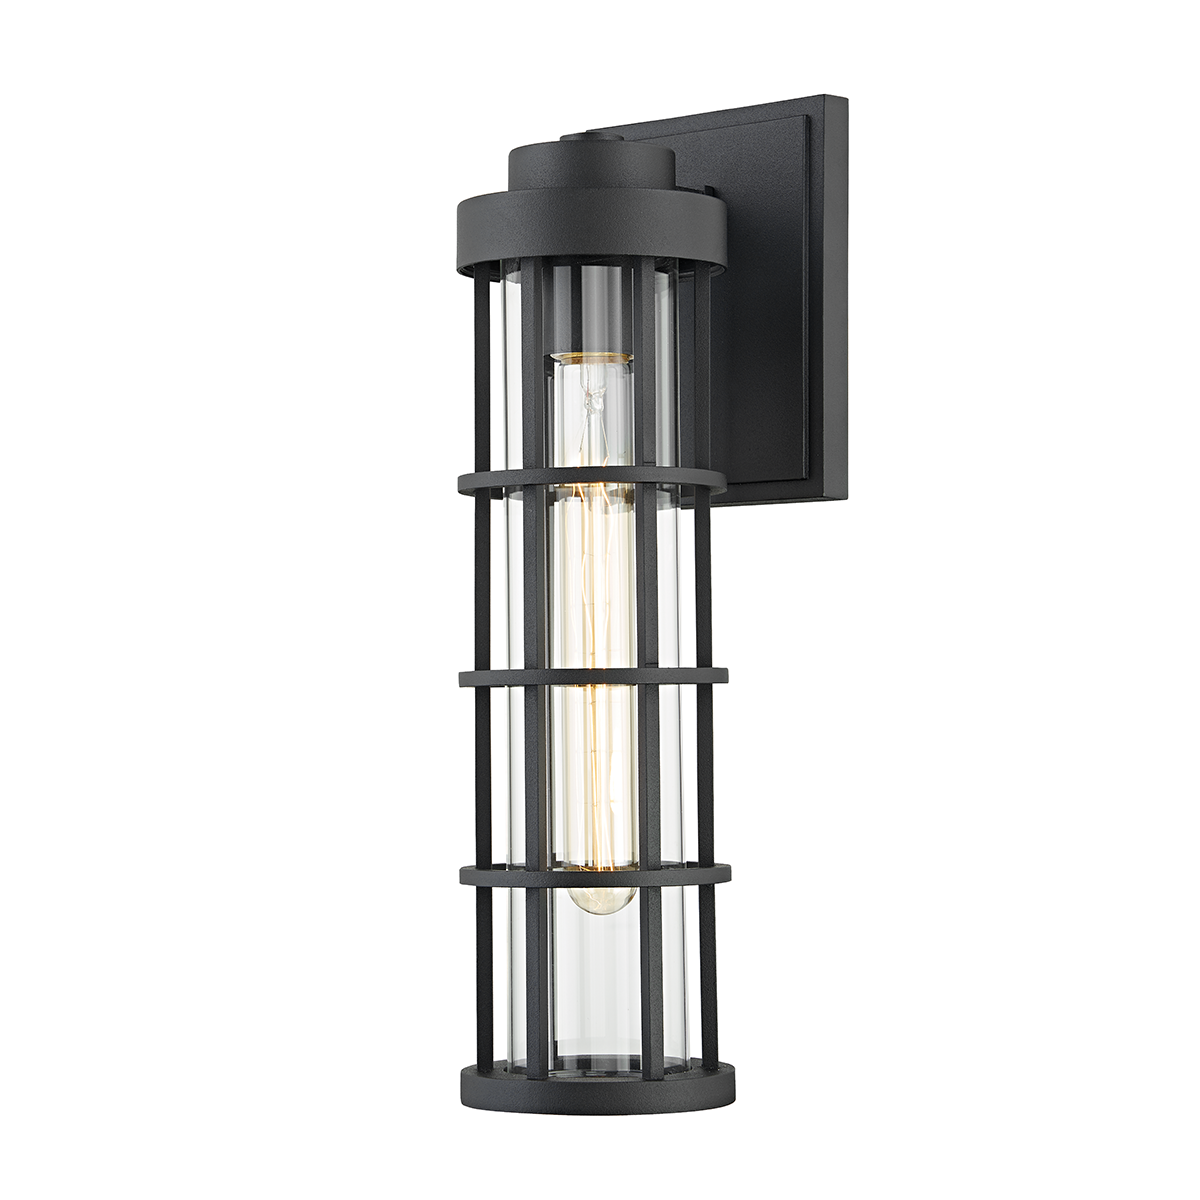 Troy Lighting 1 LIGHT LARGE EXTERIOR WALL SCONCE B2042